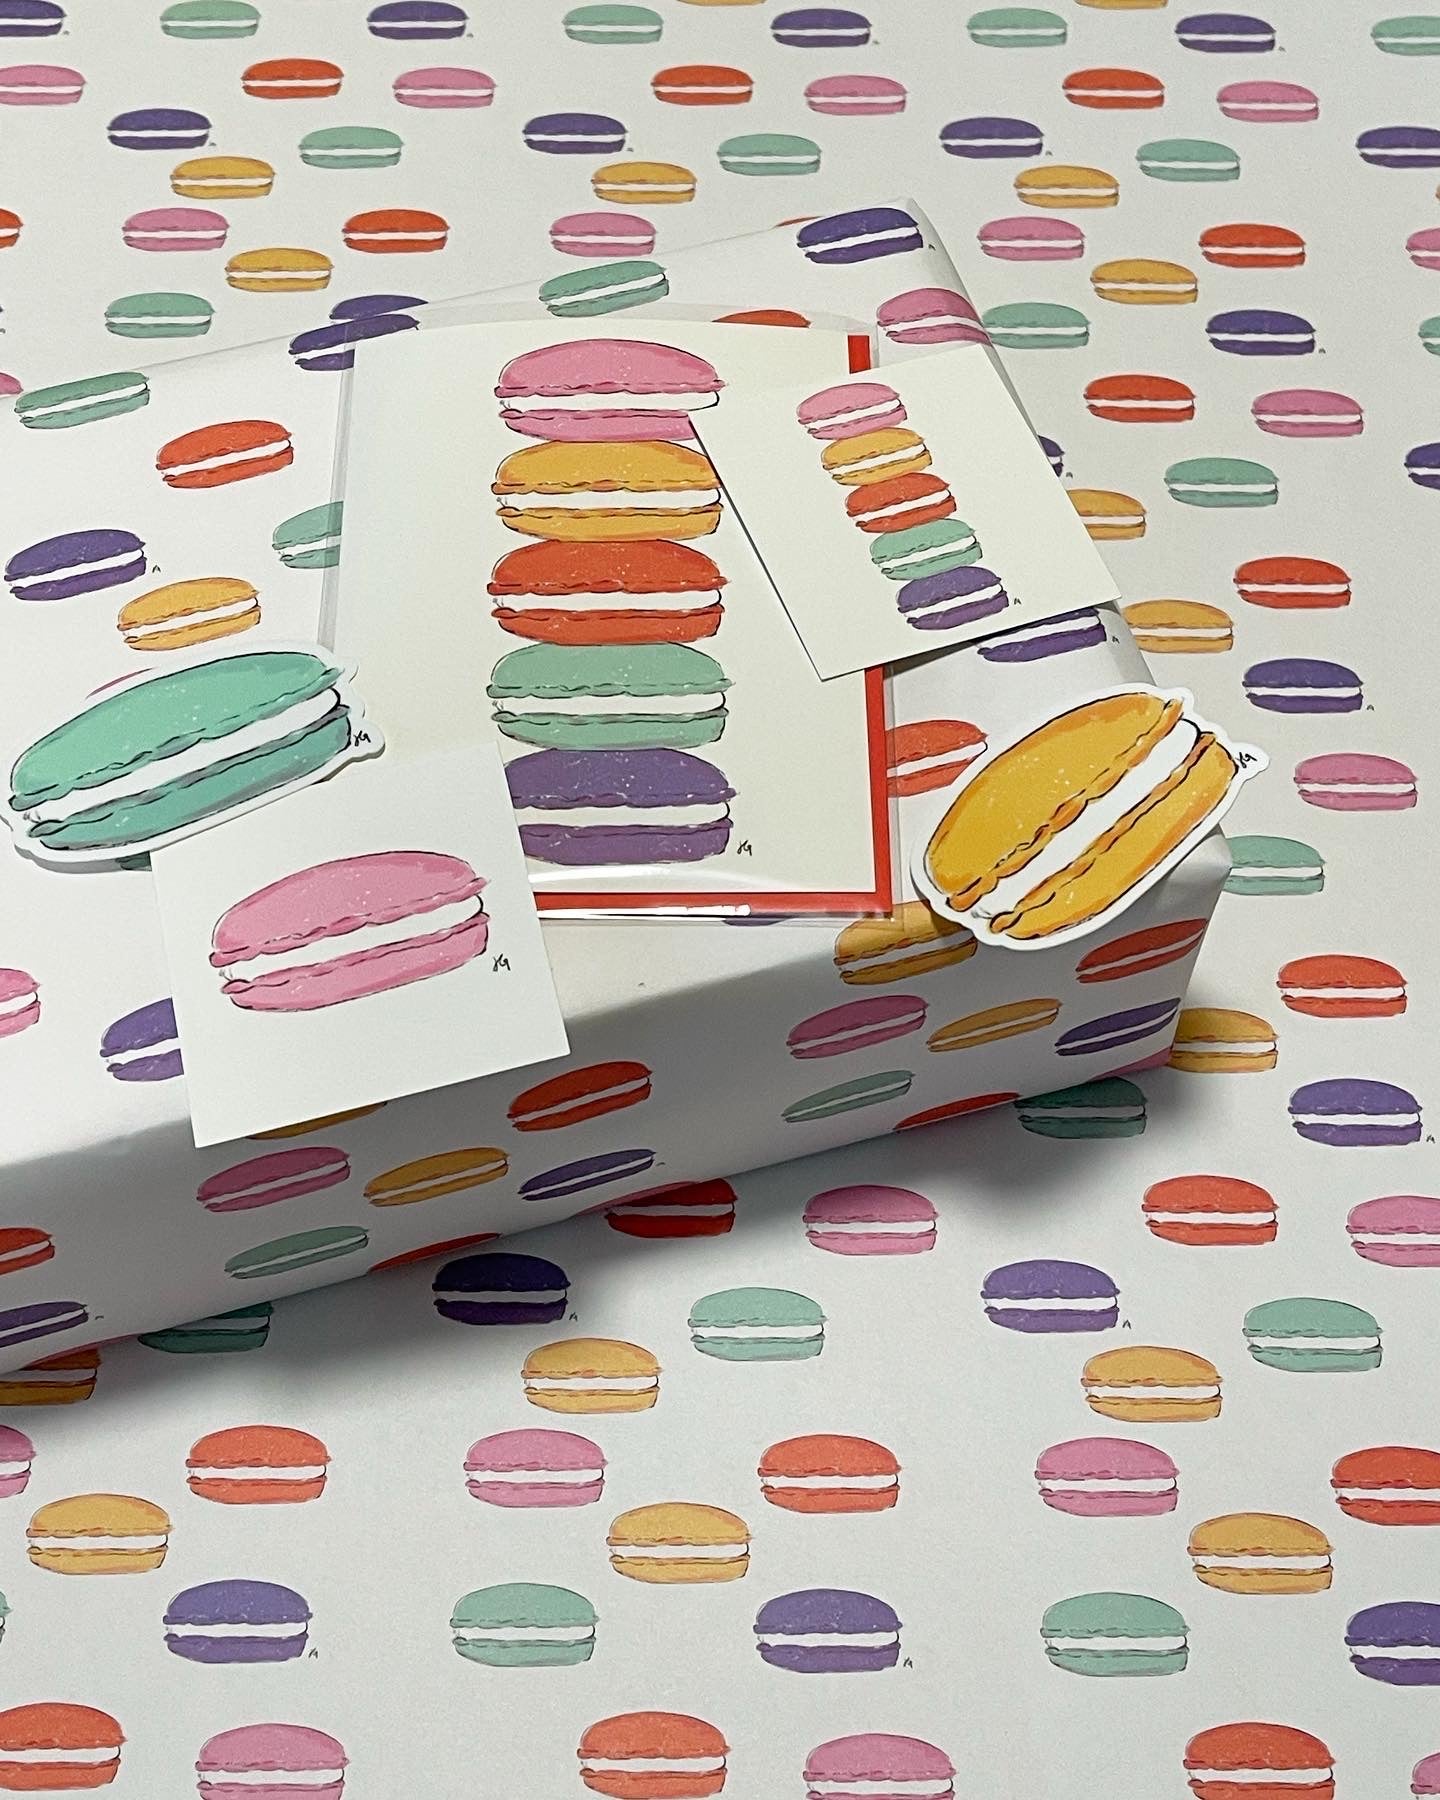 macaron suite of stickers, cards, wrapping paper. Each includes the colors pink, purple, mint, orange and yellow